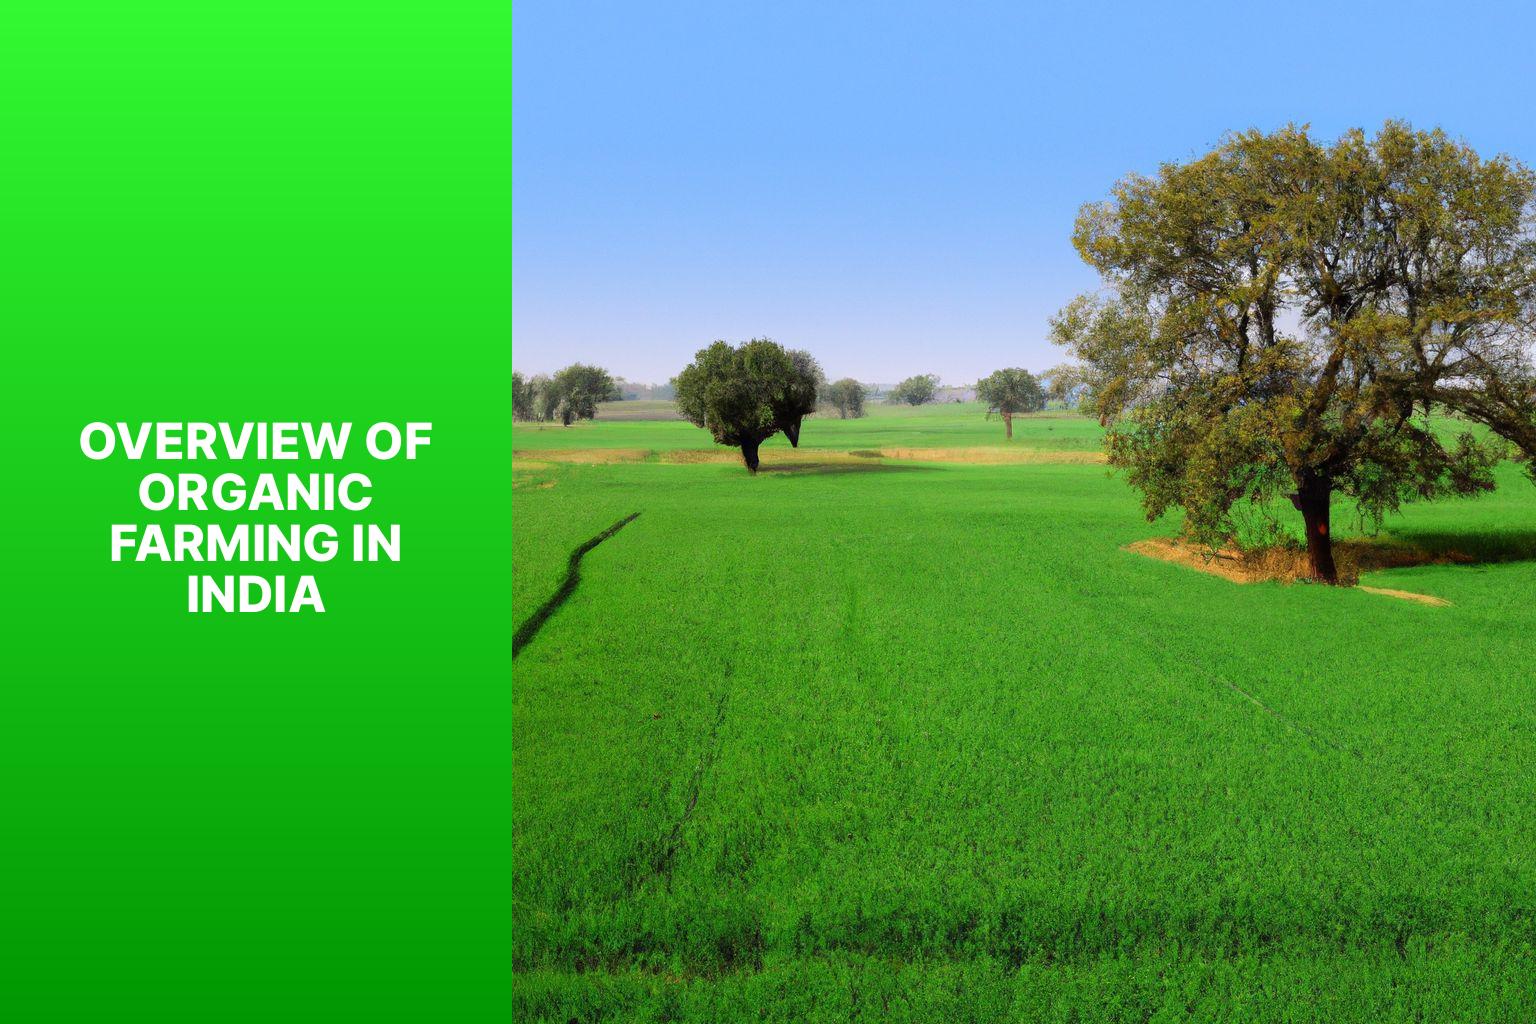 Overview of Organic Farming in India - History of Organic Farming in India 